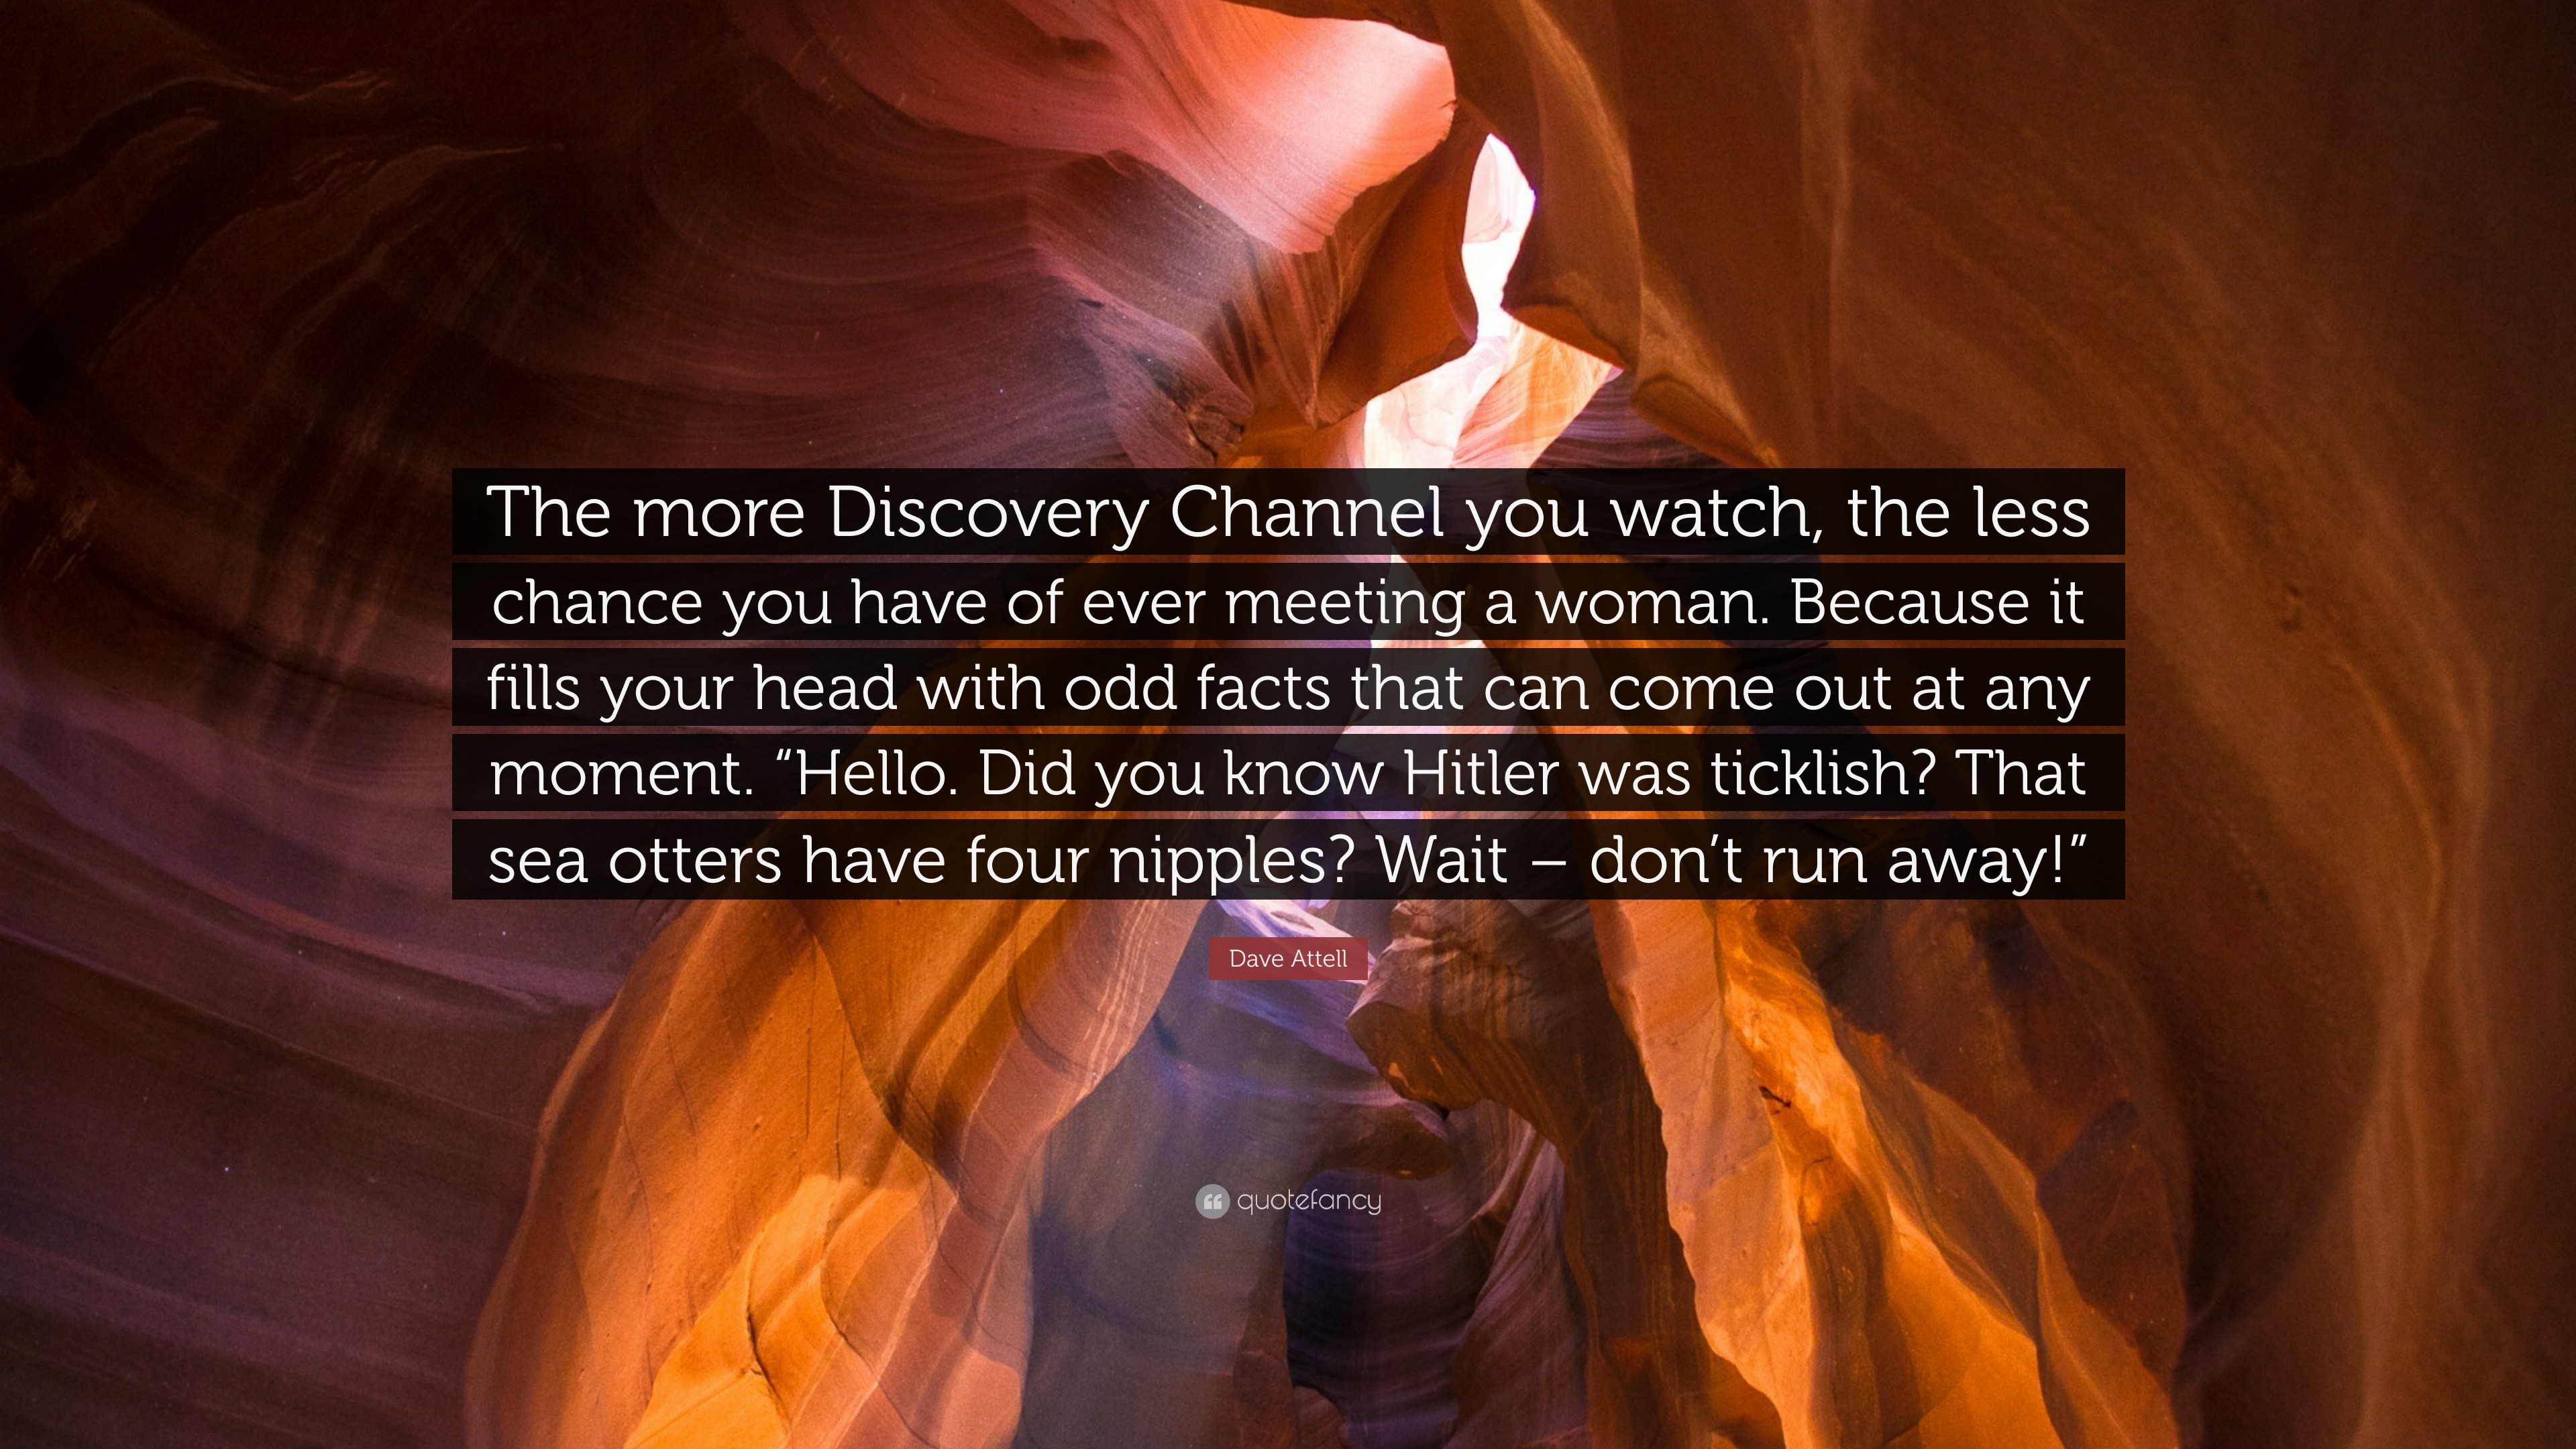 Dave Attell Quote: “The more Discovery Channel you watch, the less chance  you have of ever meeting a woman. Because it fills your head with ...”